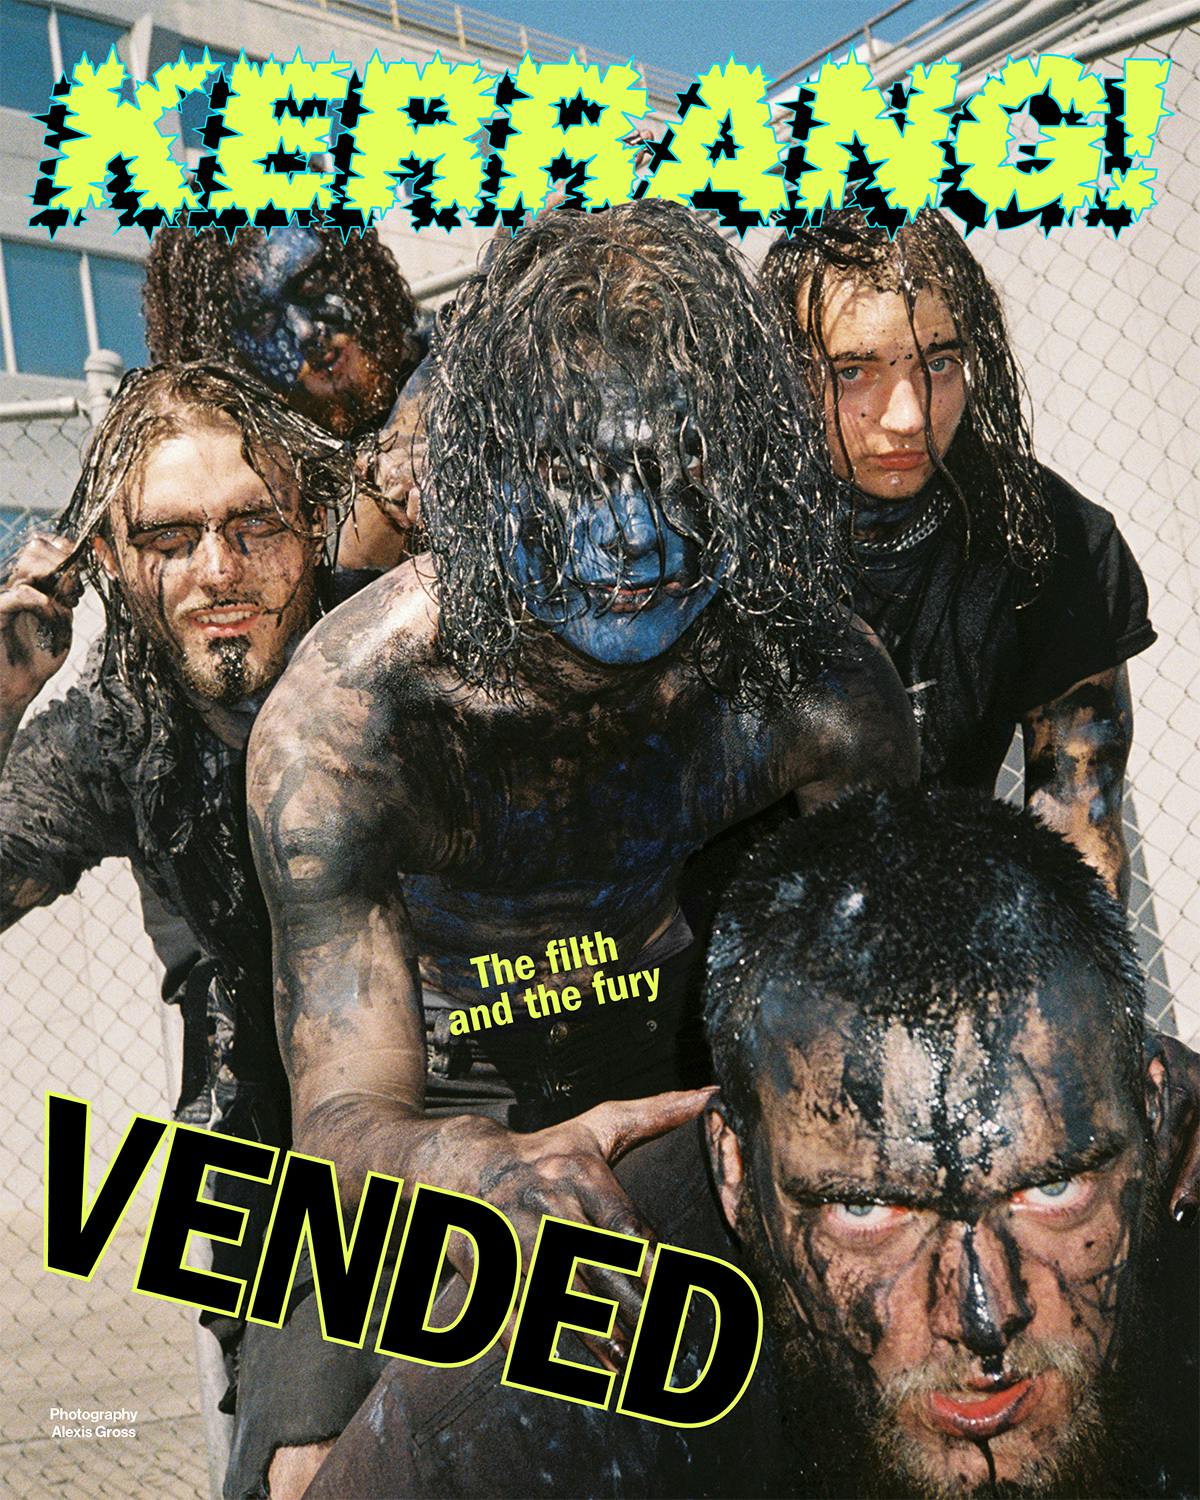 Vended: “It’s about world domination and being the biggest band in the f*cking world”